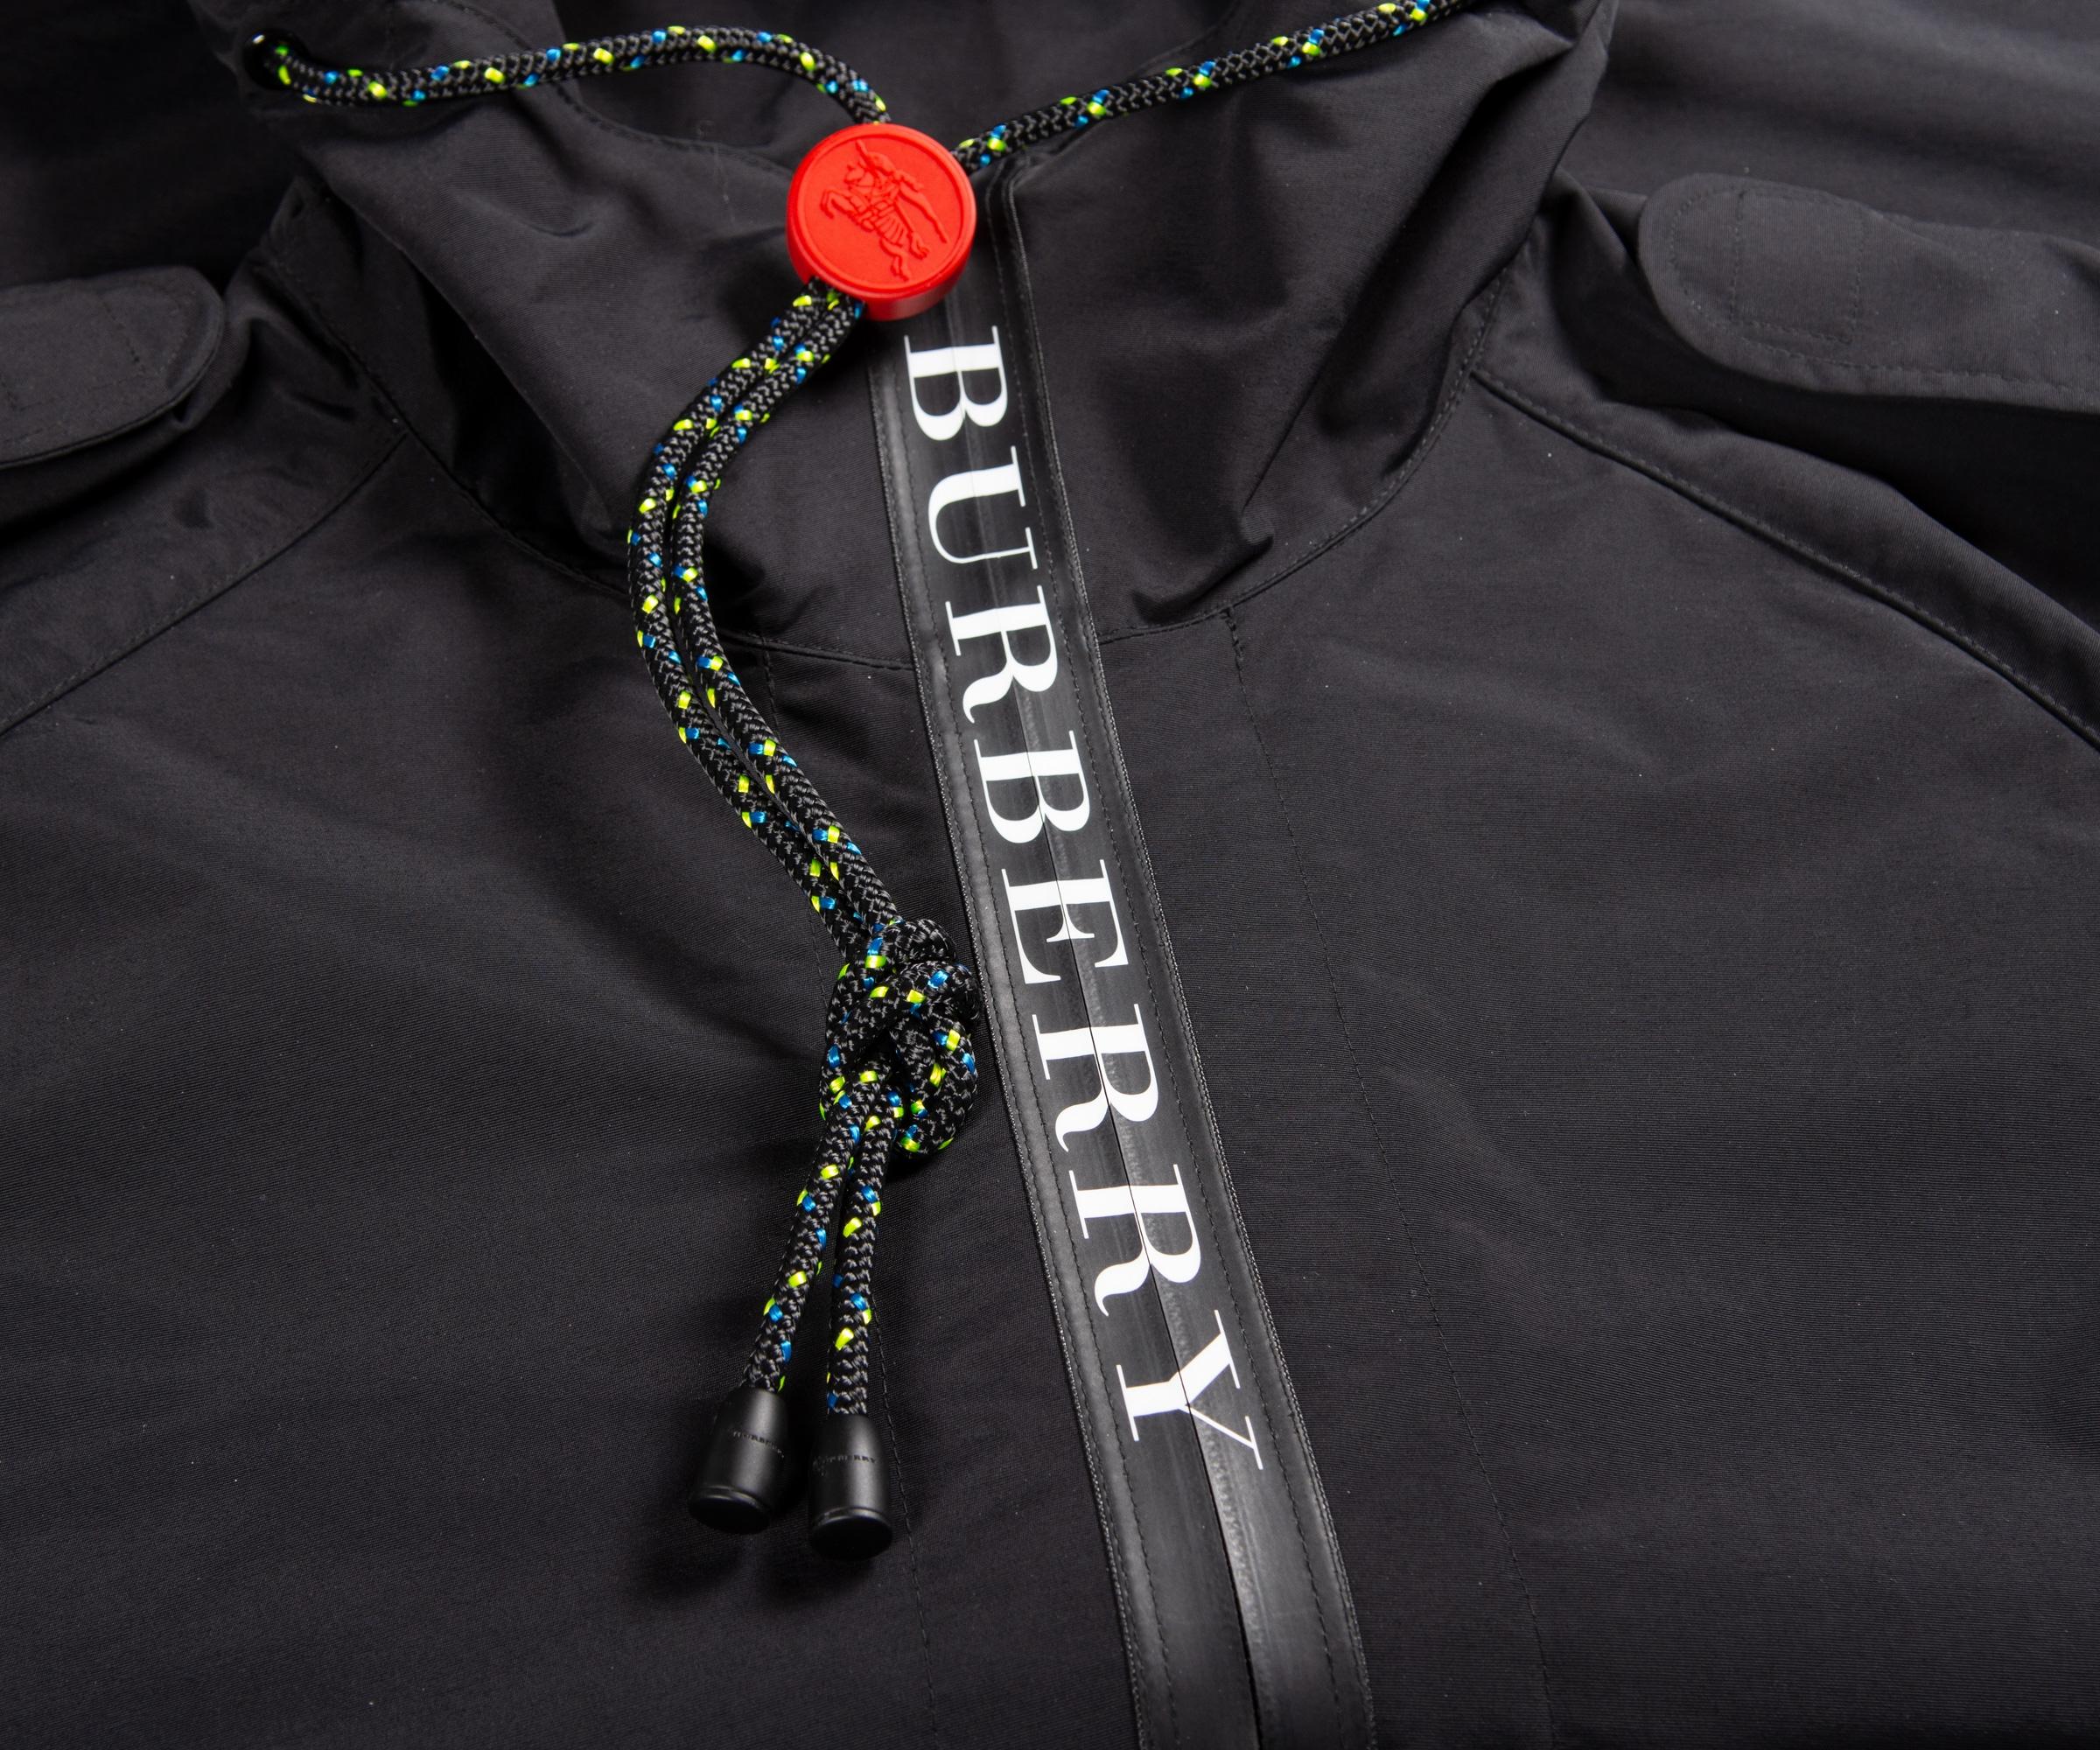 burberry bungee cord detail hooded parka